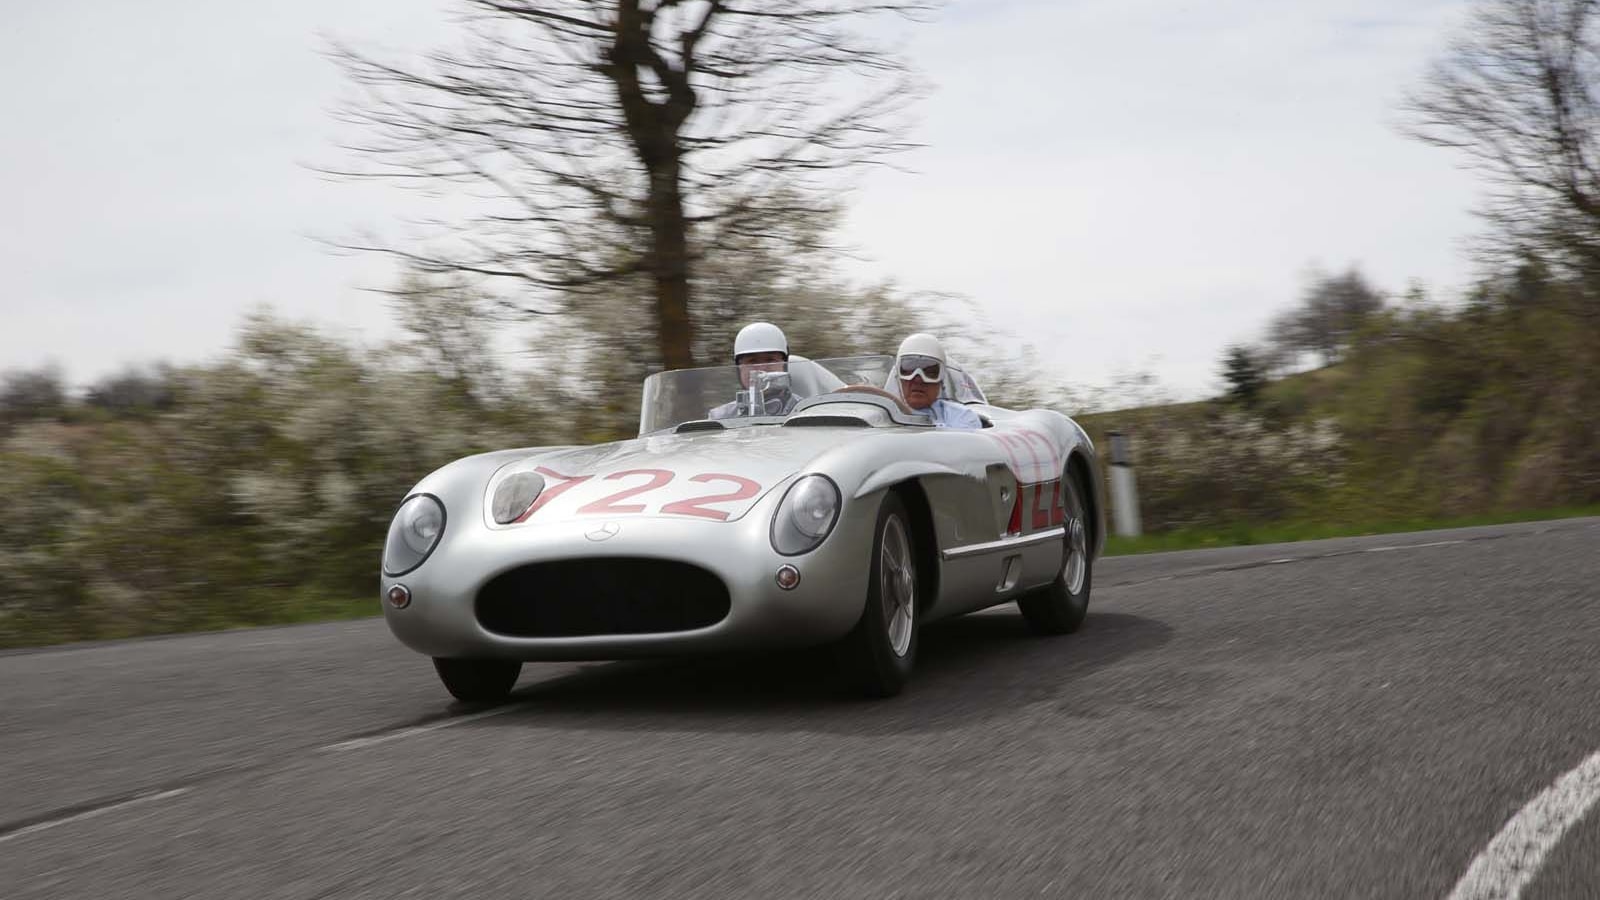 Sir Stirling Moss at the wheel of the 300 SLR